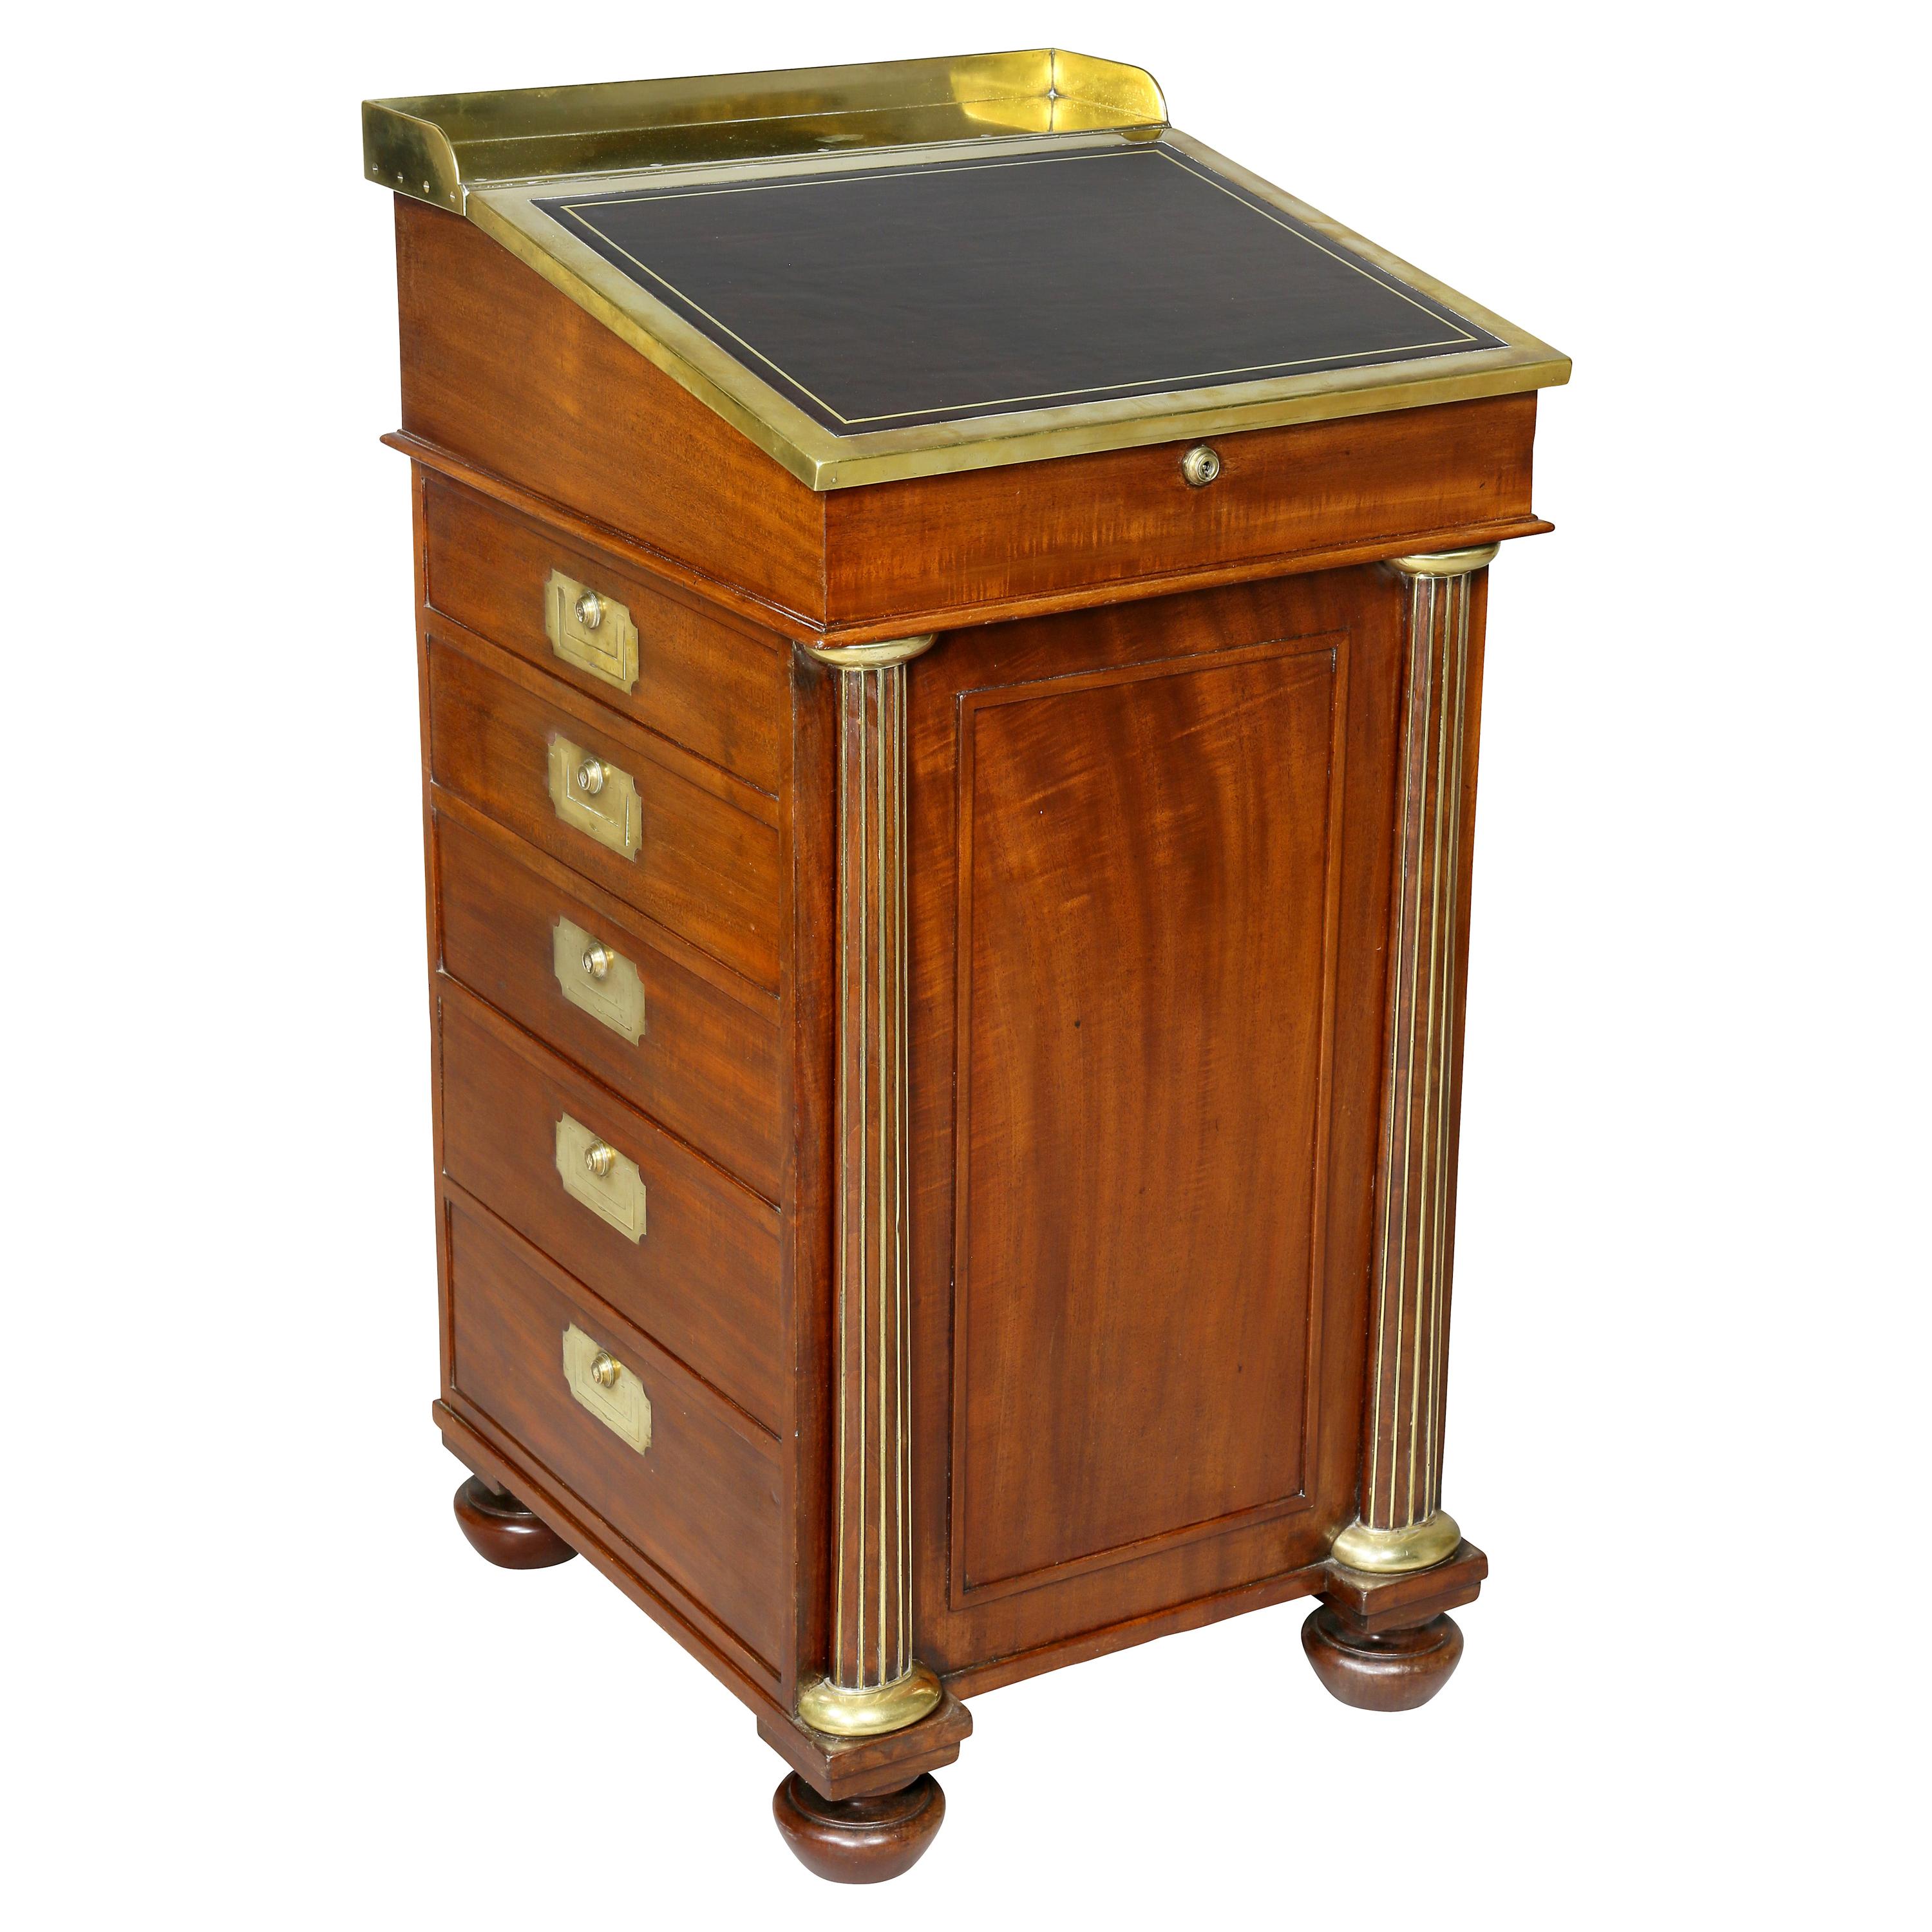 Regency Mahogany and Brass Mounted Campaign Desk